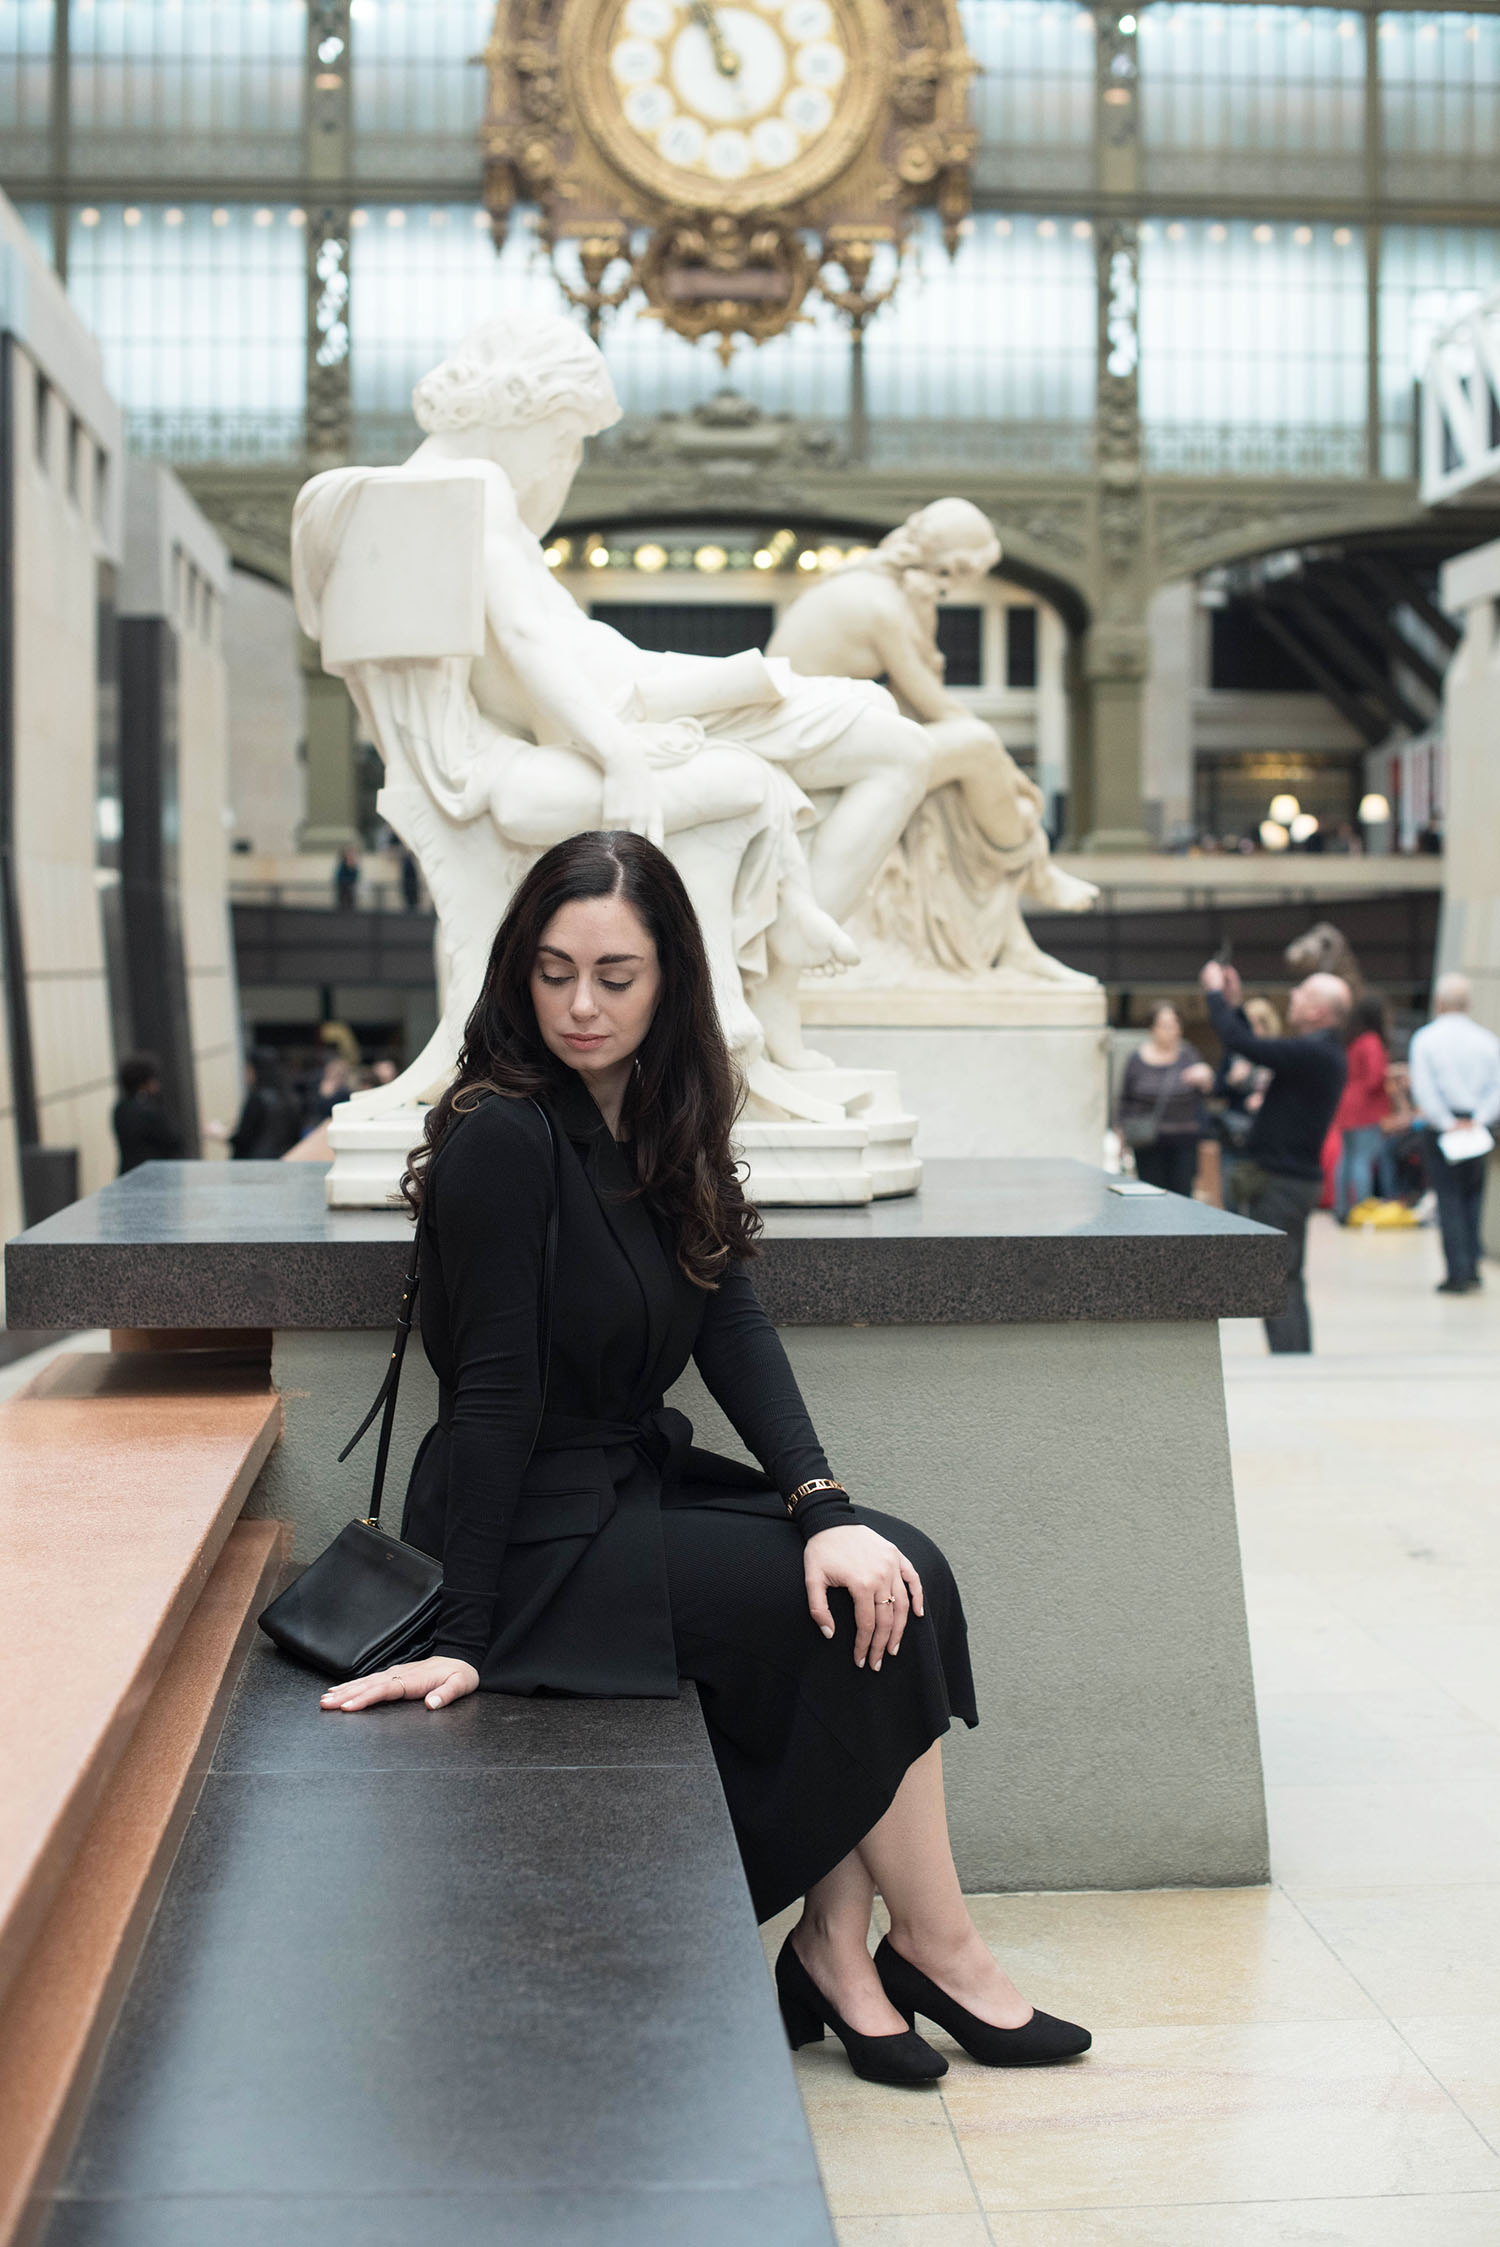 Fashion blogger Cee Fardoe of Coco & Vera sits at the Musee d'Orsay in Paris wearing a Zara waistcoat and carrying a Celine trio bag